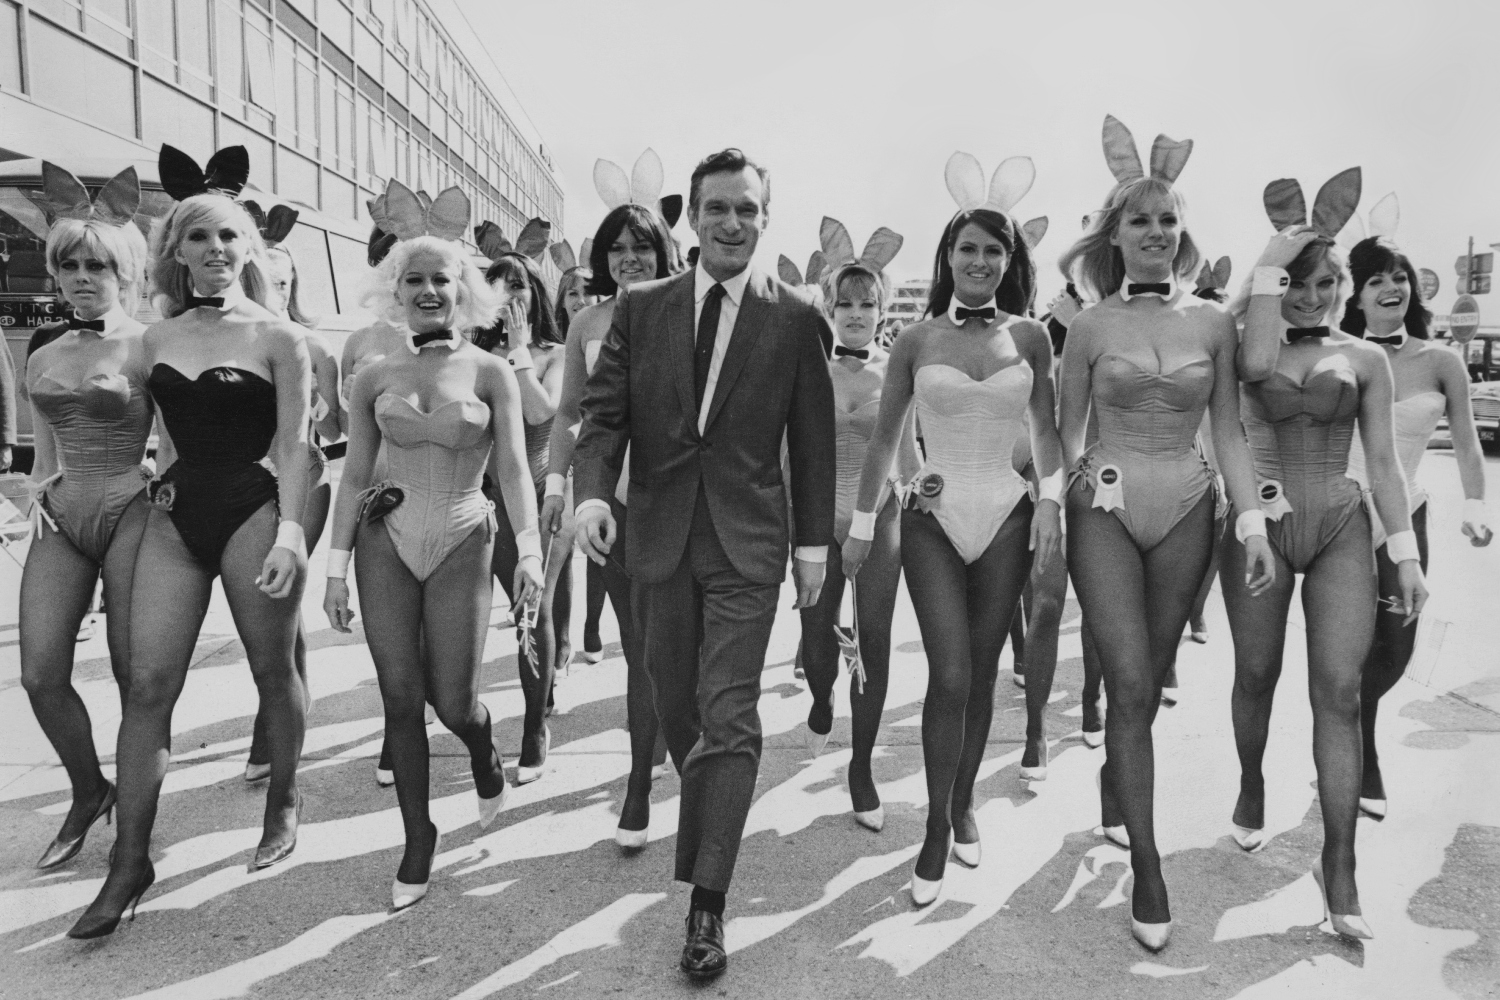 American publisher Hugh Hefner arrives at London Airport from Chicago with an entourage of Playboy Bunnies, 26th June 1966. He is in the capital for the opening of the London Playboy Club on Park Lane.